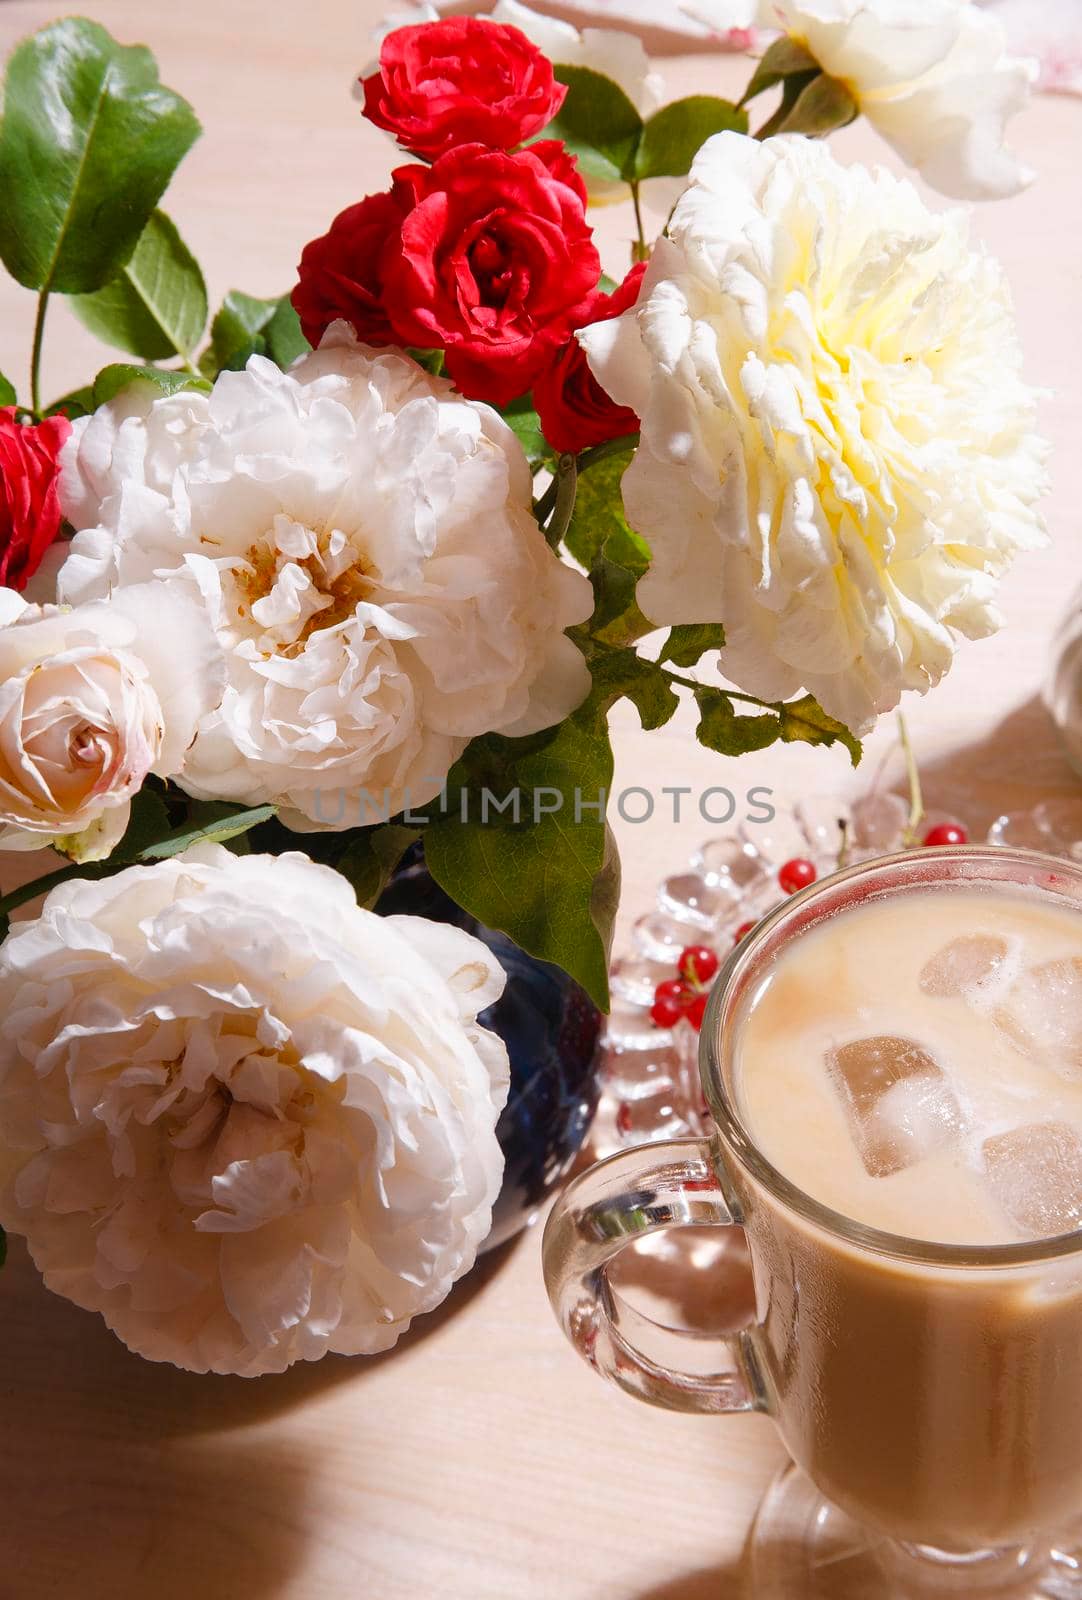 A cup of iced coffee with a bouquet of white, yellow and red roses on white table in the early summer morning, selective focus, hard light close up.